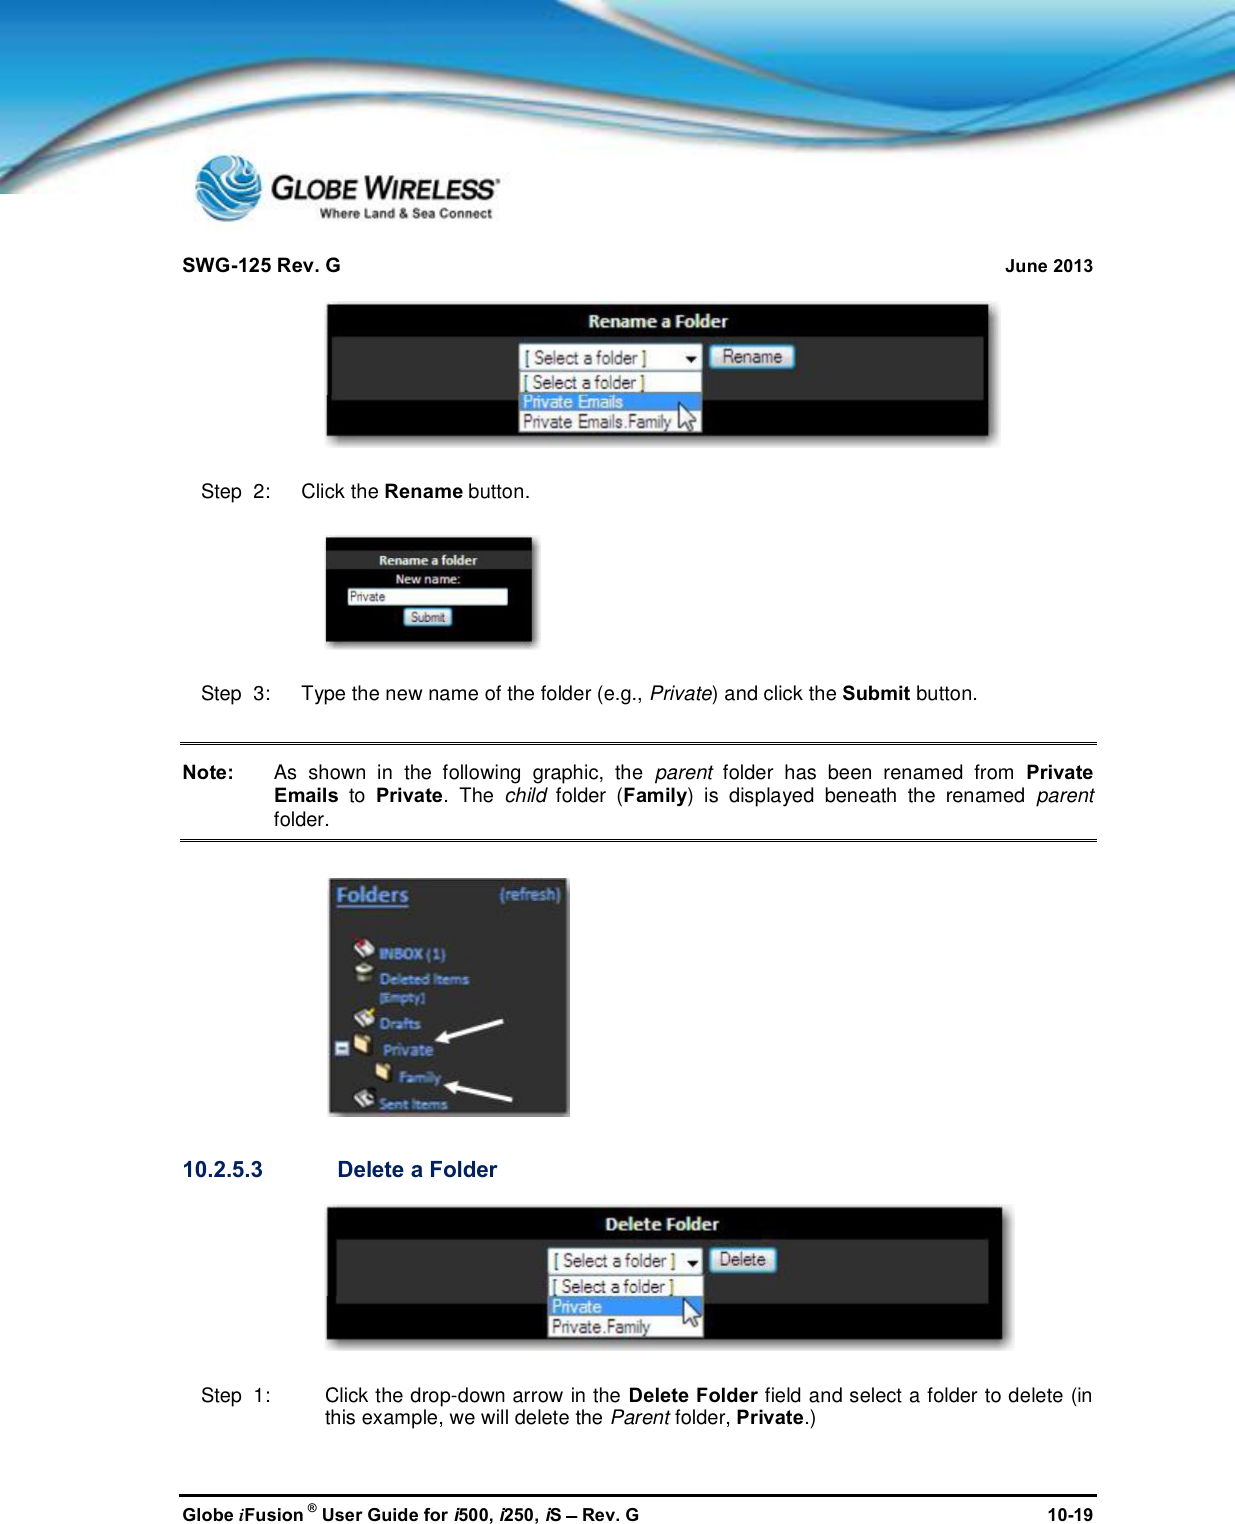 SWG-125 Rev. G June 2013Globe iFusion ®User Guide for i500, i250, iSRev. G 10-19Step  2:   Click the Rename button.Step  3:   Type the new name of the folder (e.g., Private) and click the Submit button.Note: As shown in the following graphic, the parent folder has been renamed from PrivateEmails to Private. The child folder (Family) is displayed beneath the renamed parentfolder.10.2.5.3 Delete a FolderStep  1: Click the drop-down arrow in the Delete Folder field and select a folder to delete (inthis example, we will delete the Parent folder, Private.)